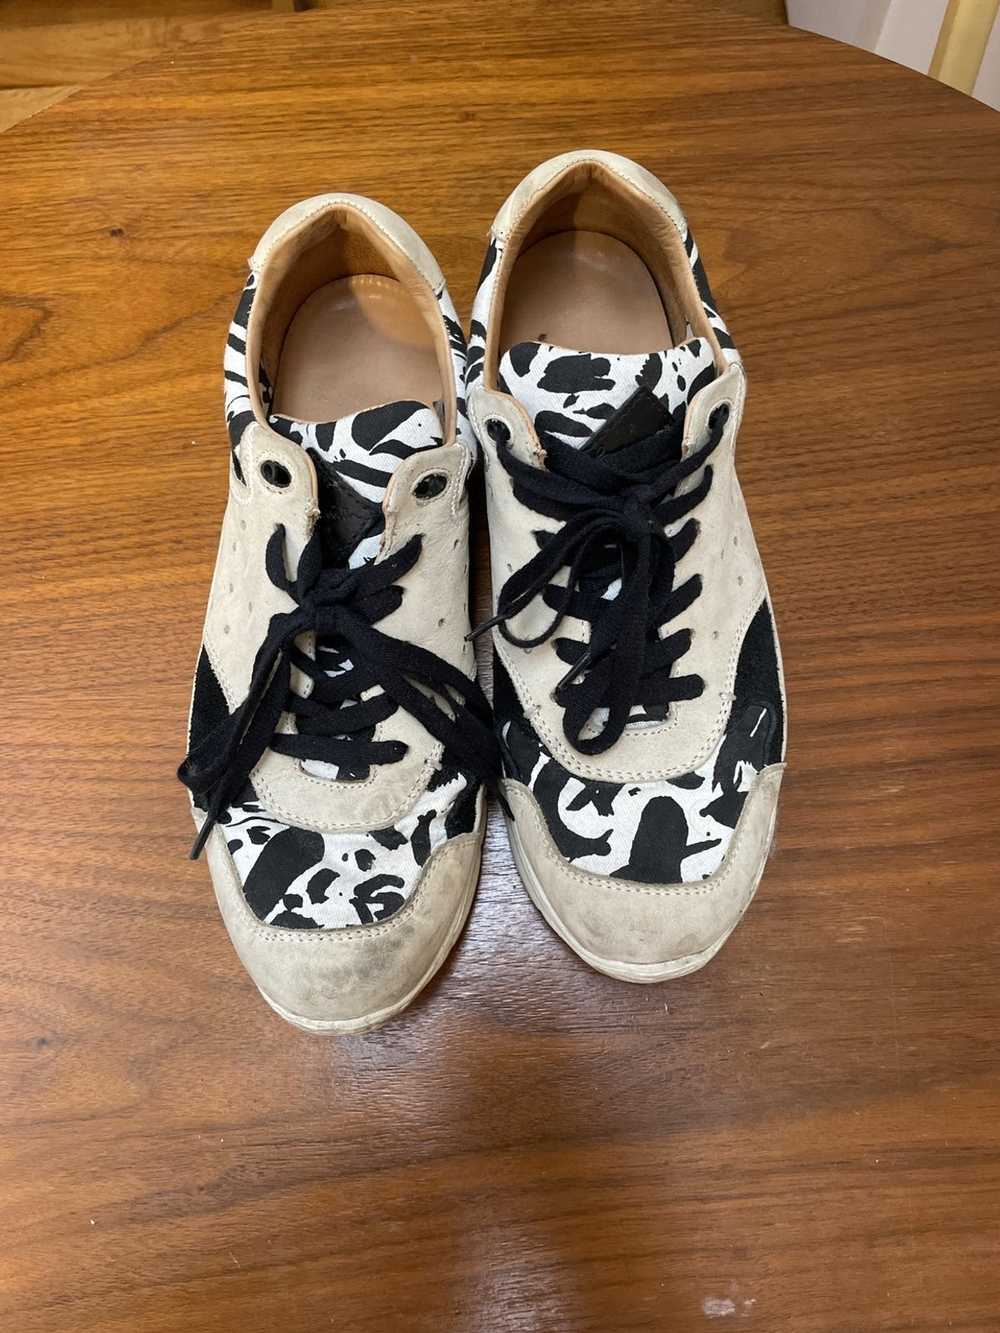 Paul Smith Cow Print Suede Paul Smith sneaker - image 3